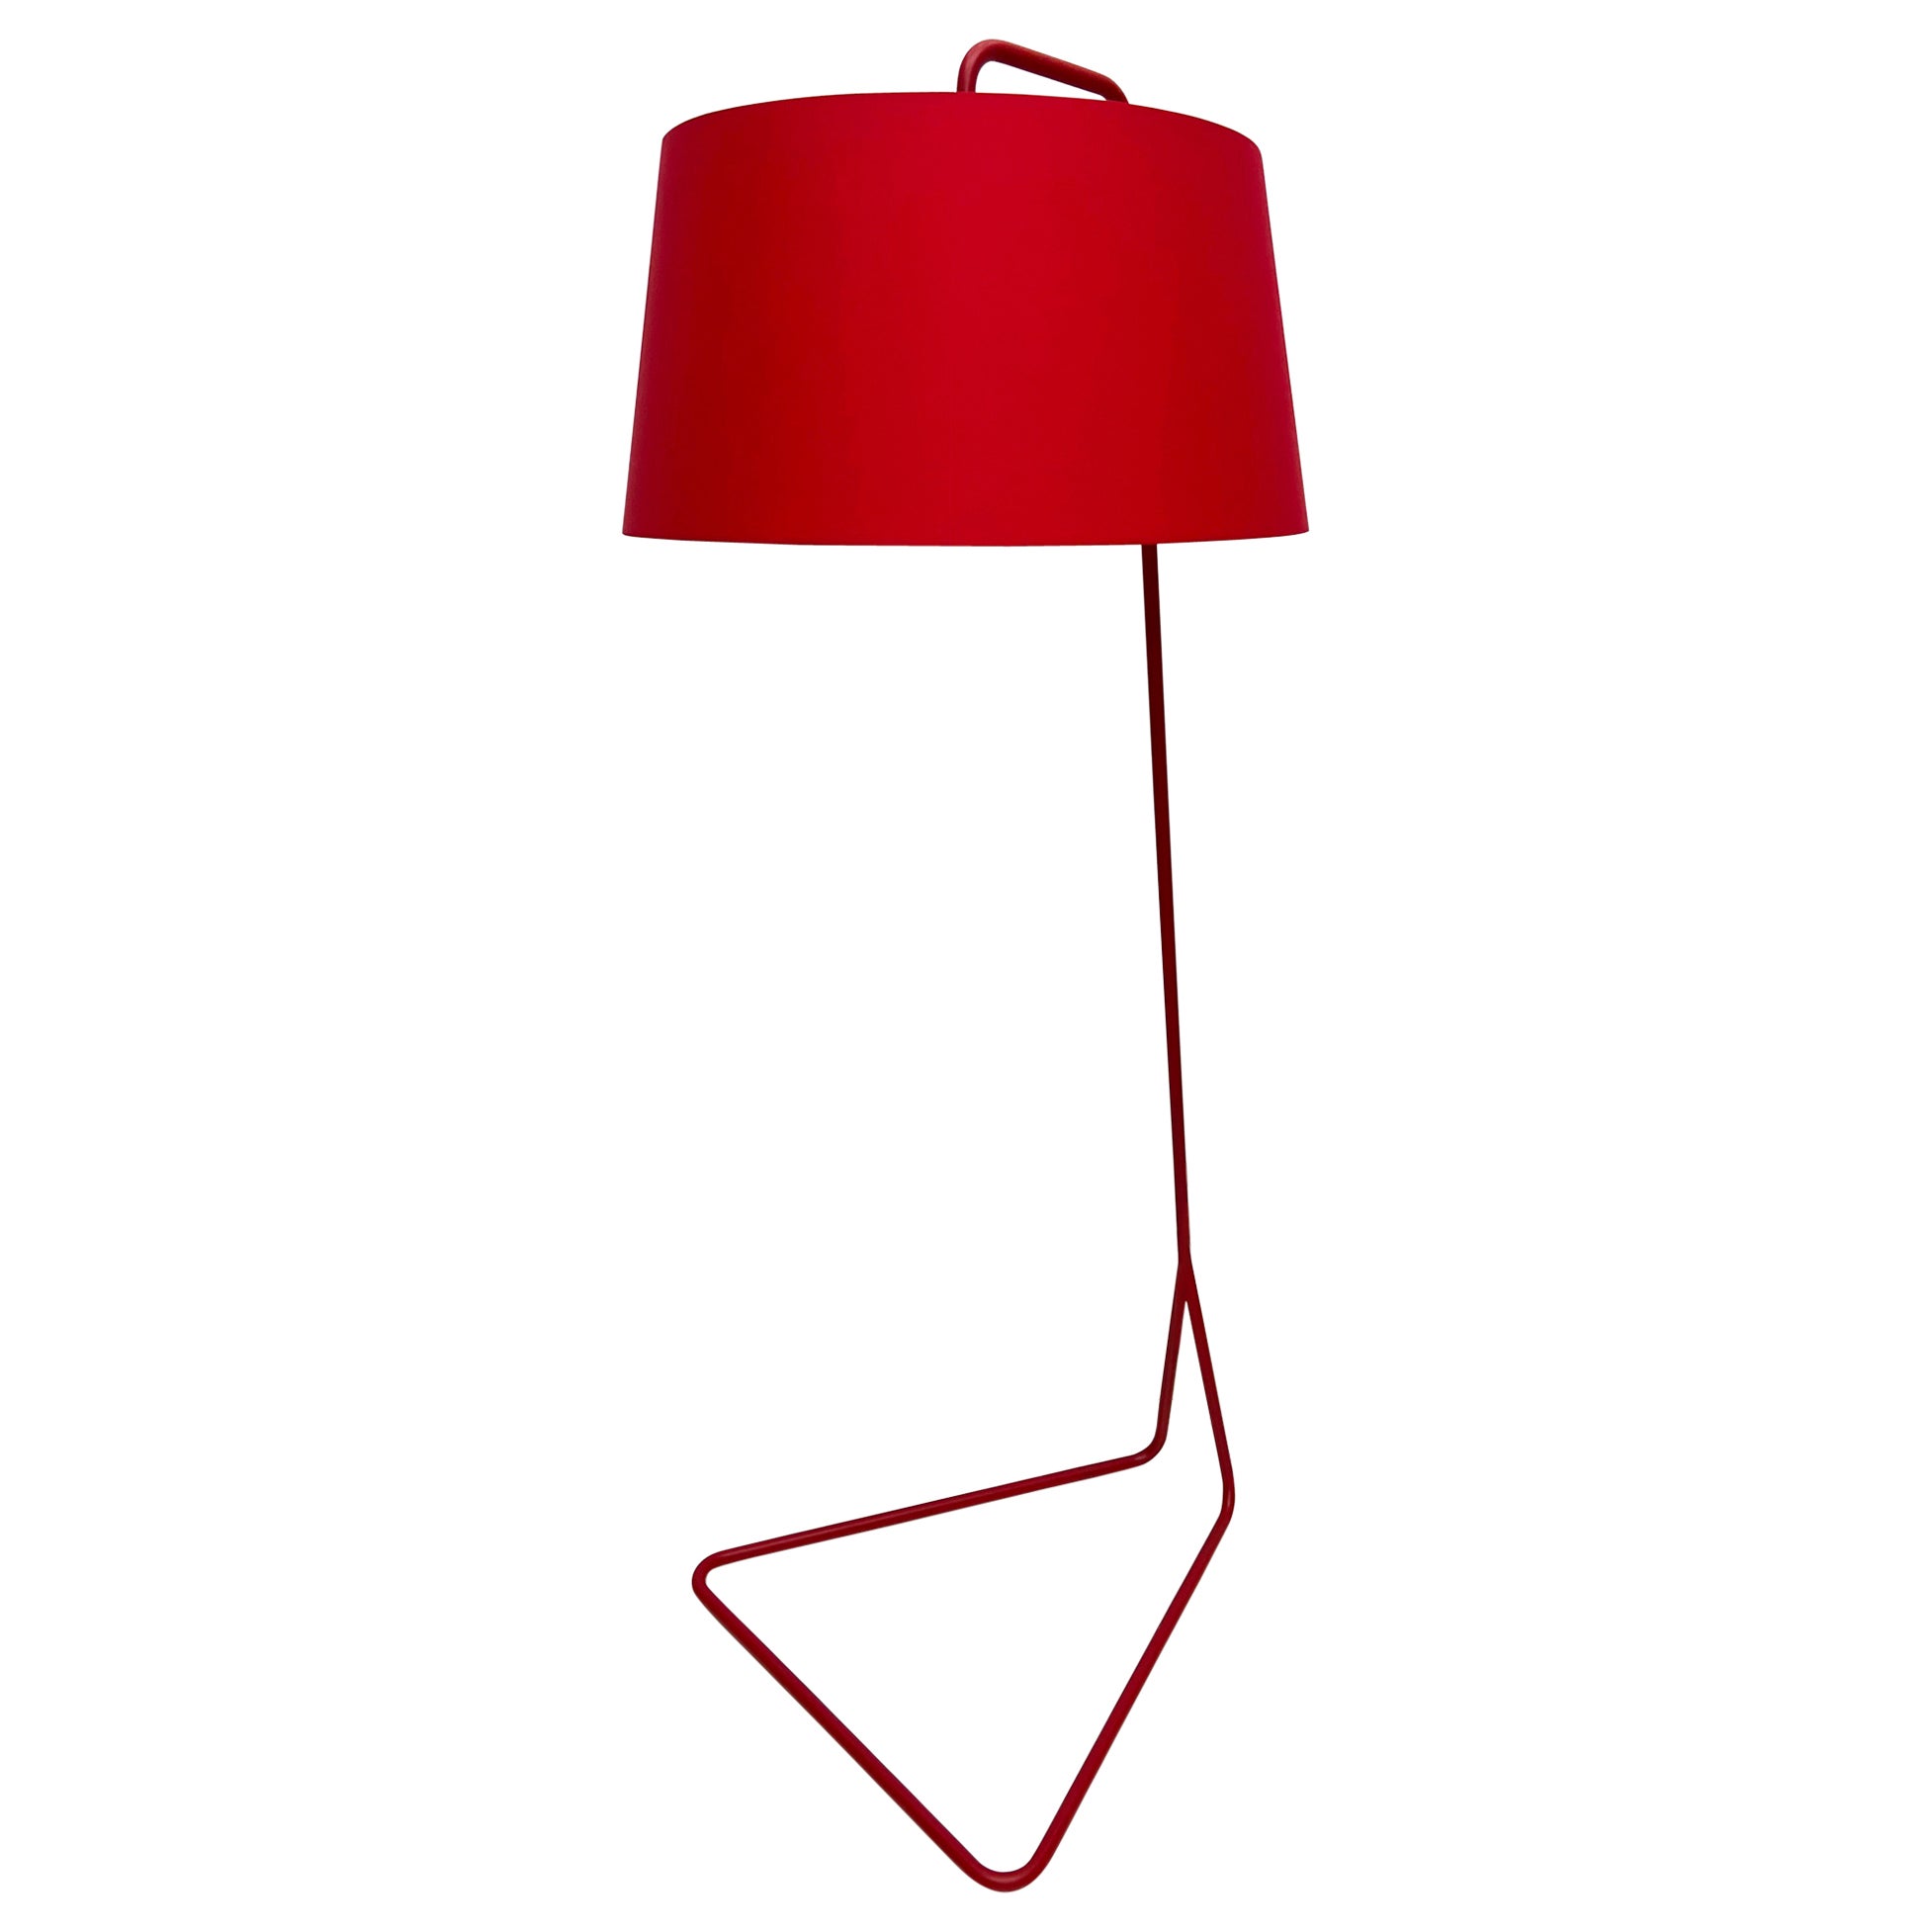 Like New Calligaris Sextans Floor Lamp in Red from Italy For Sale